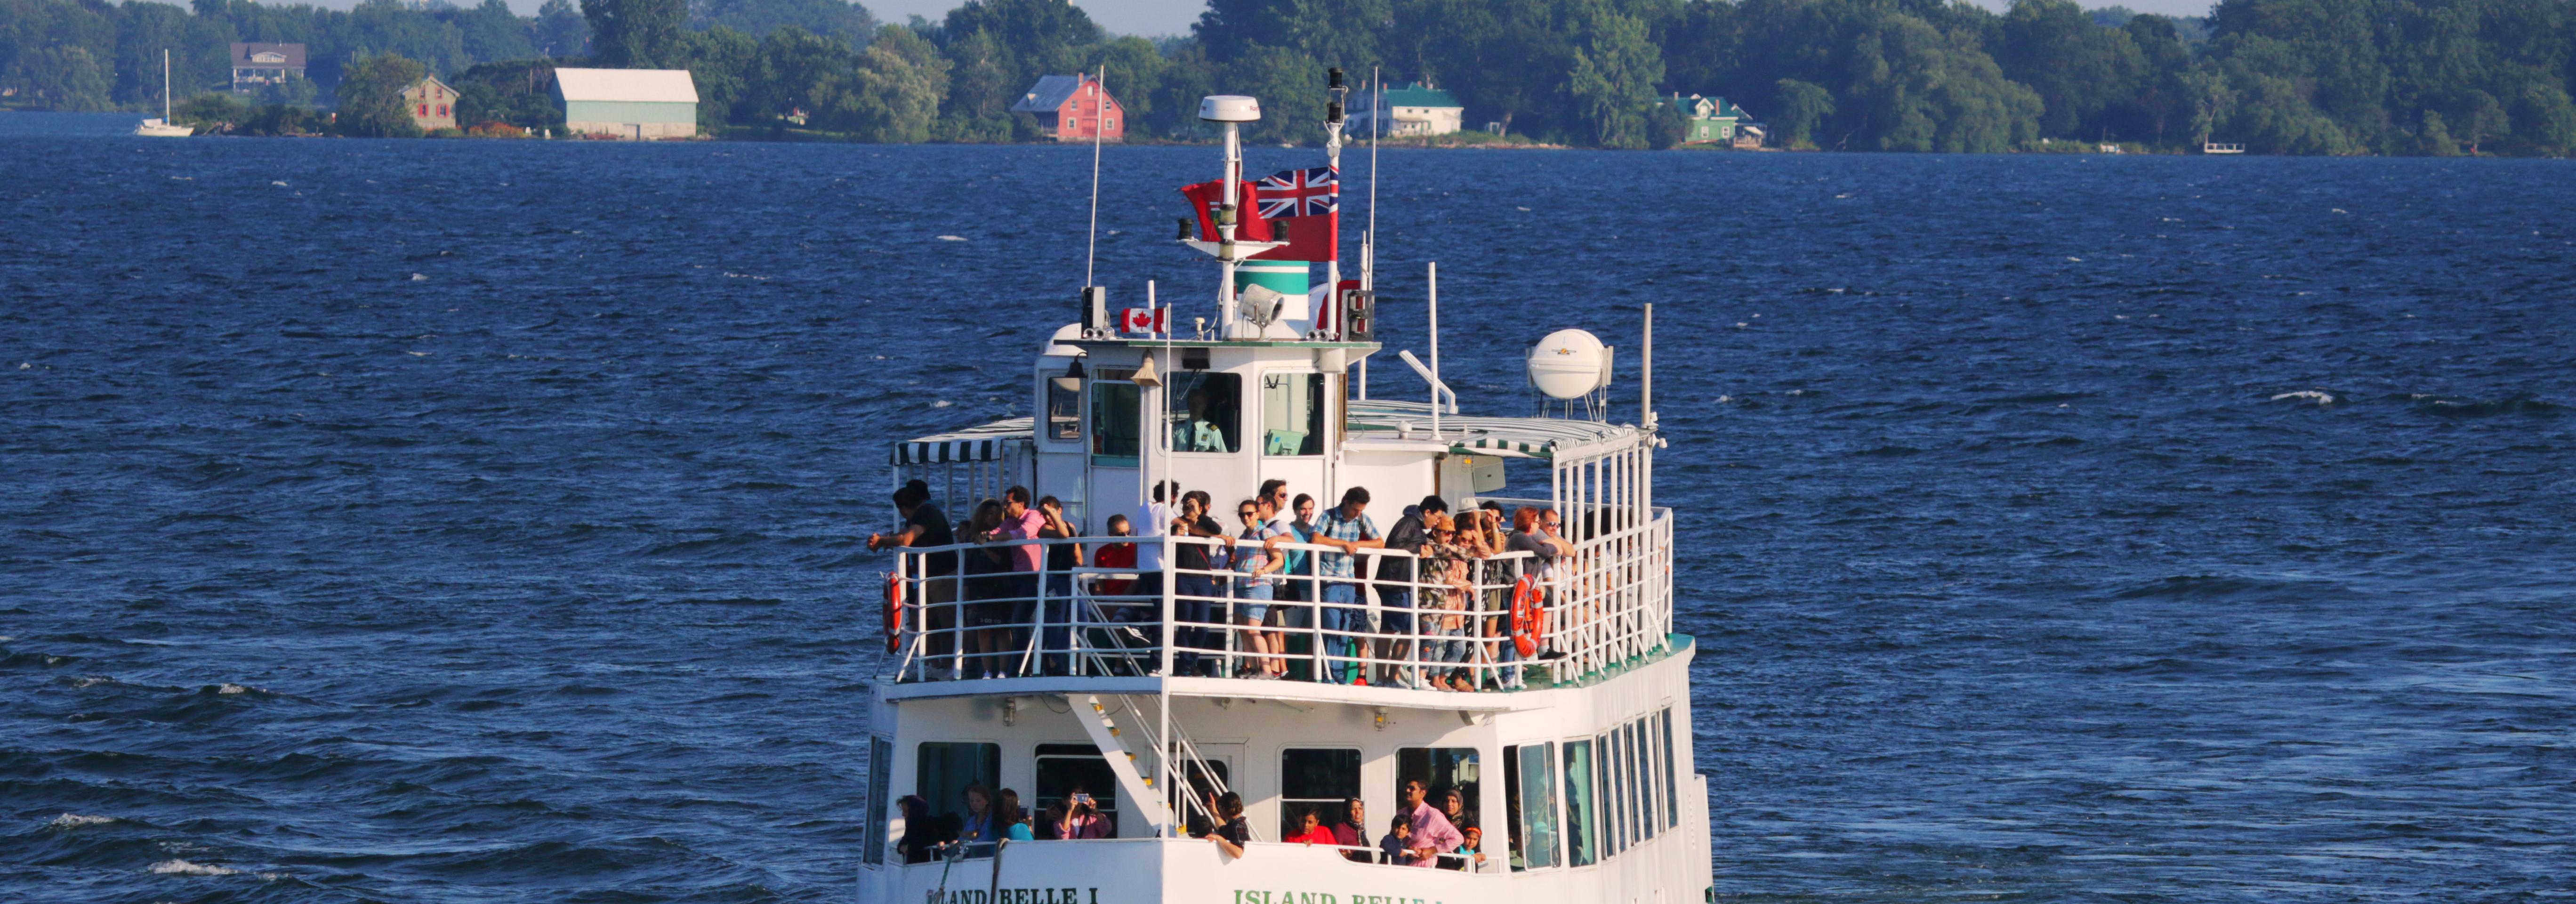 discovery boat cruise kingston